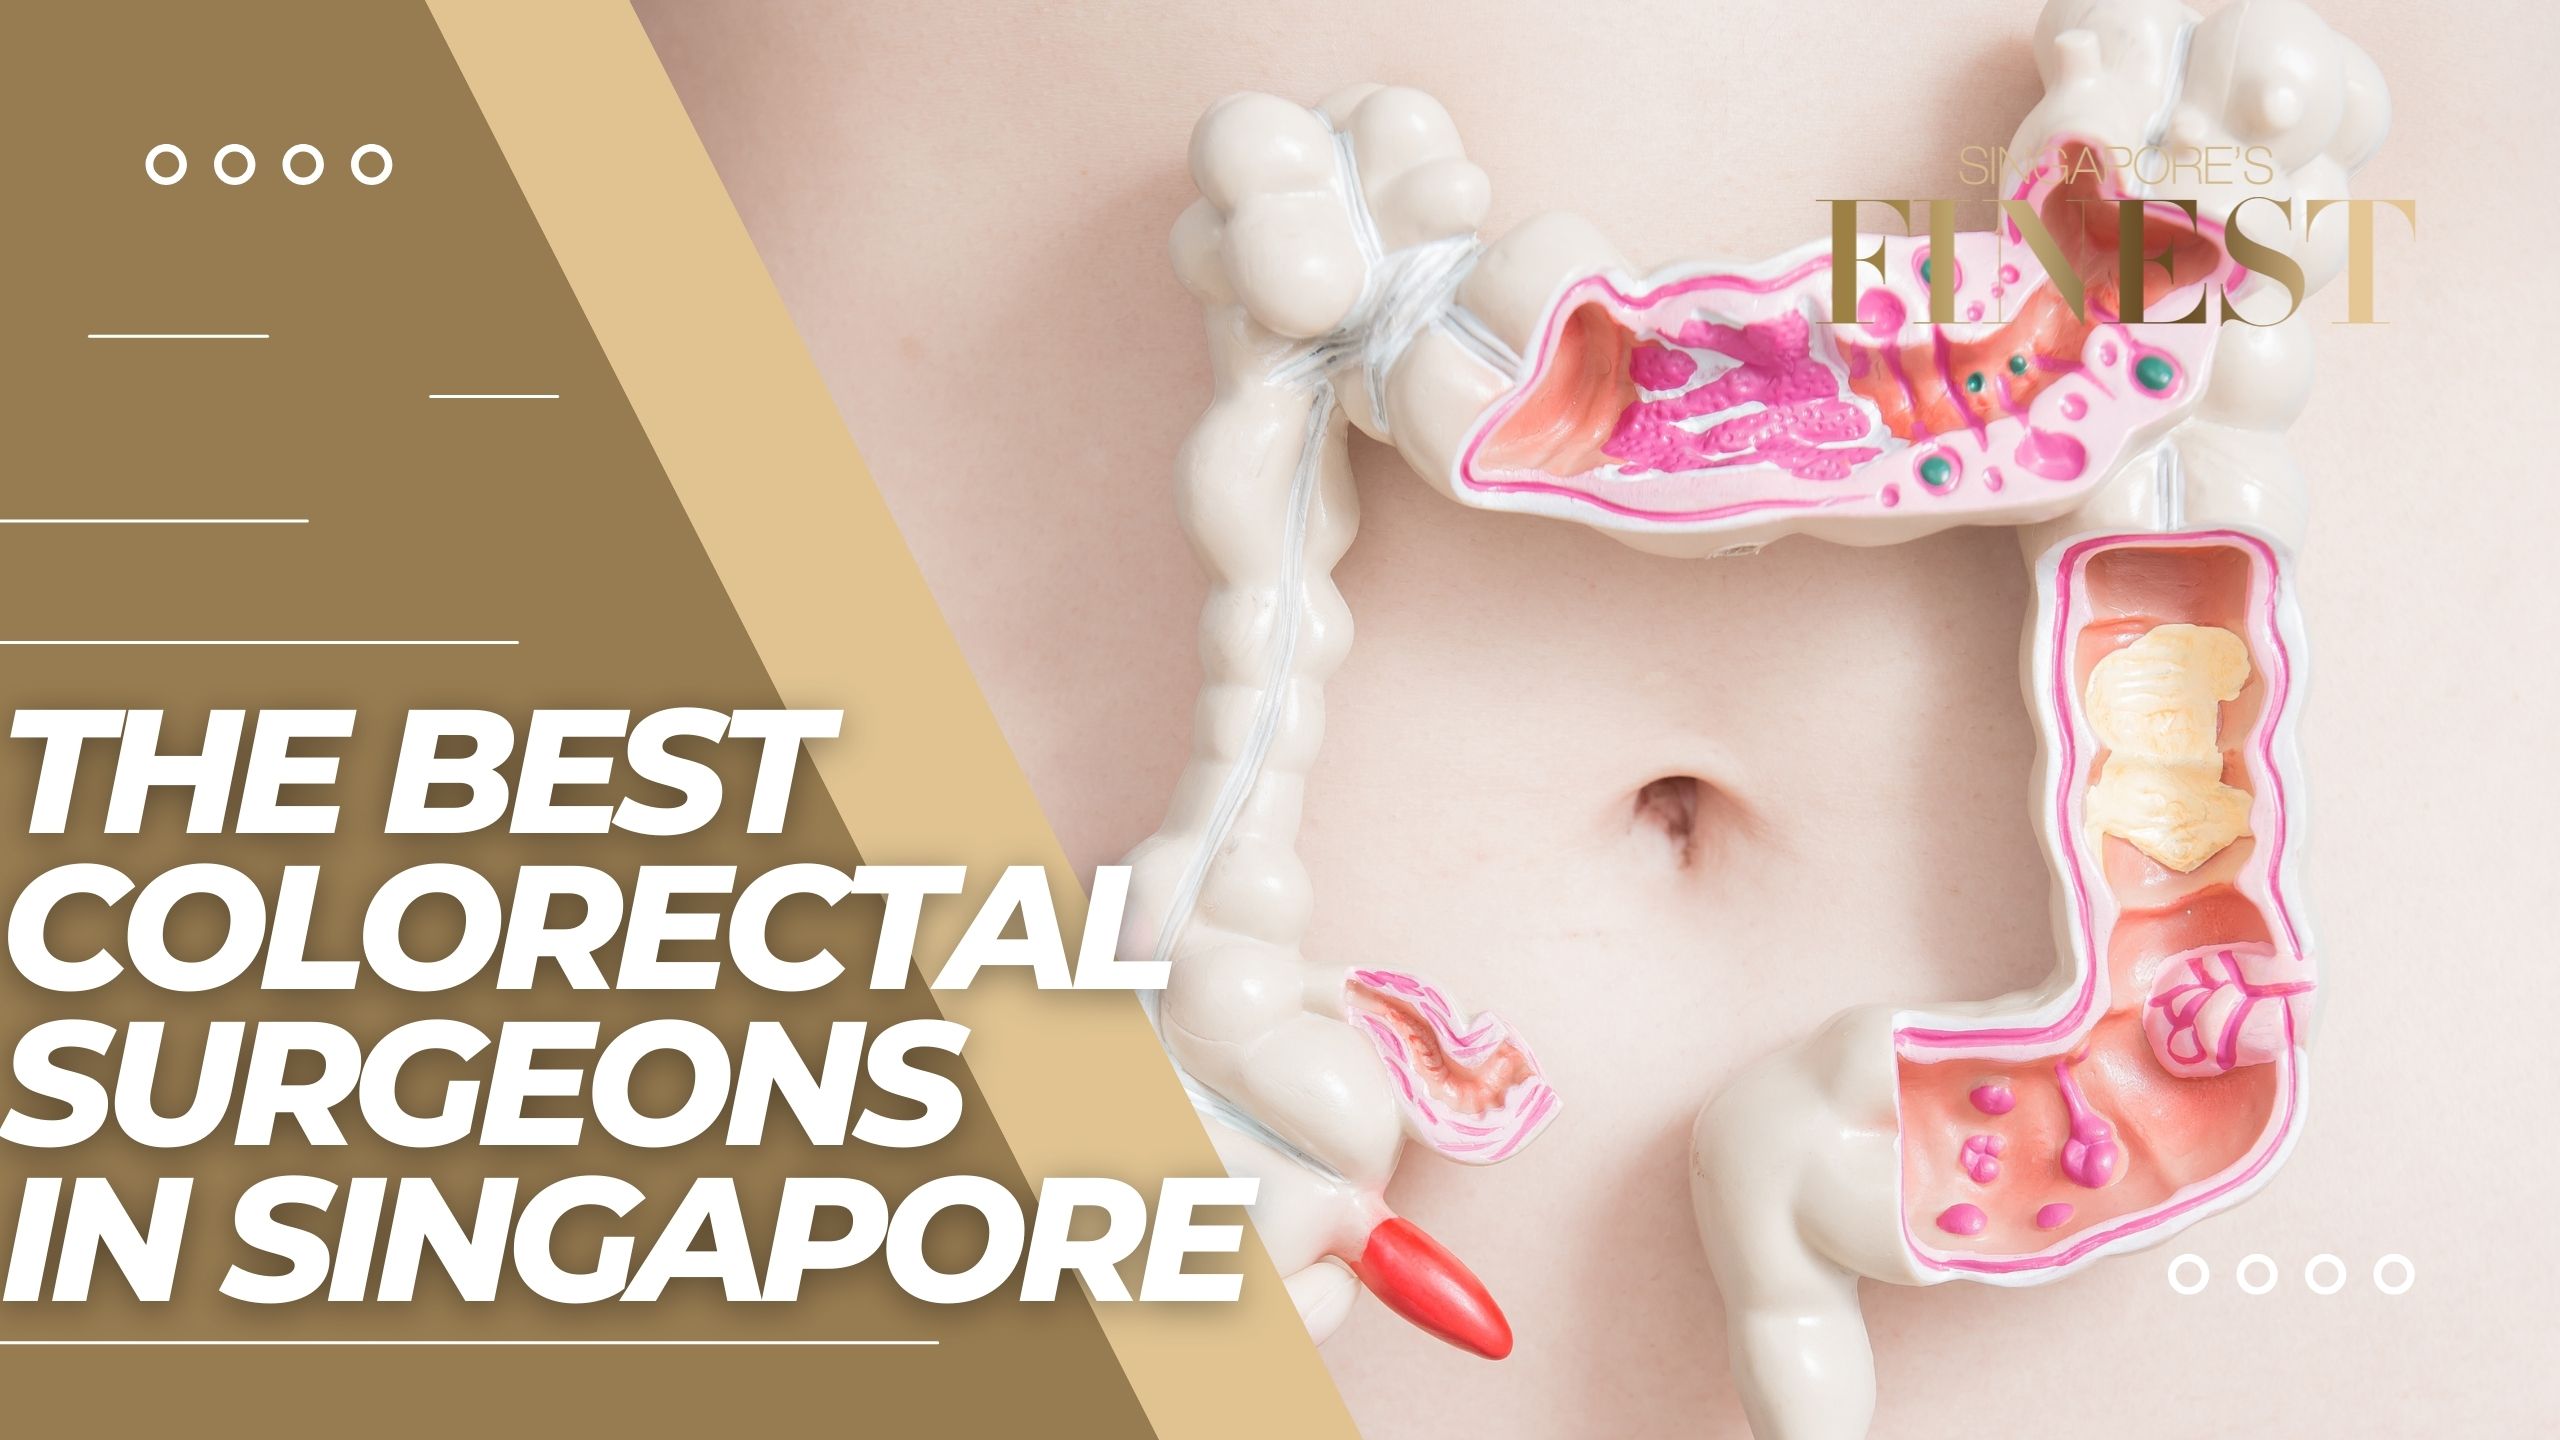 The Finest Colorectal Surgeons in Singapore